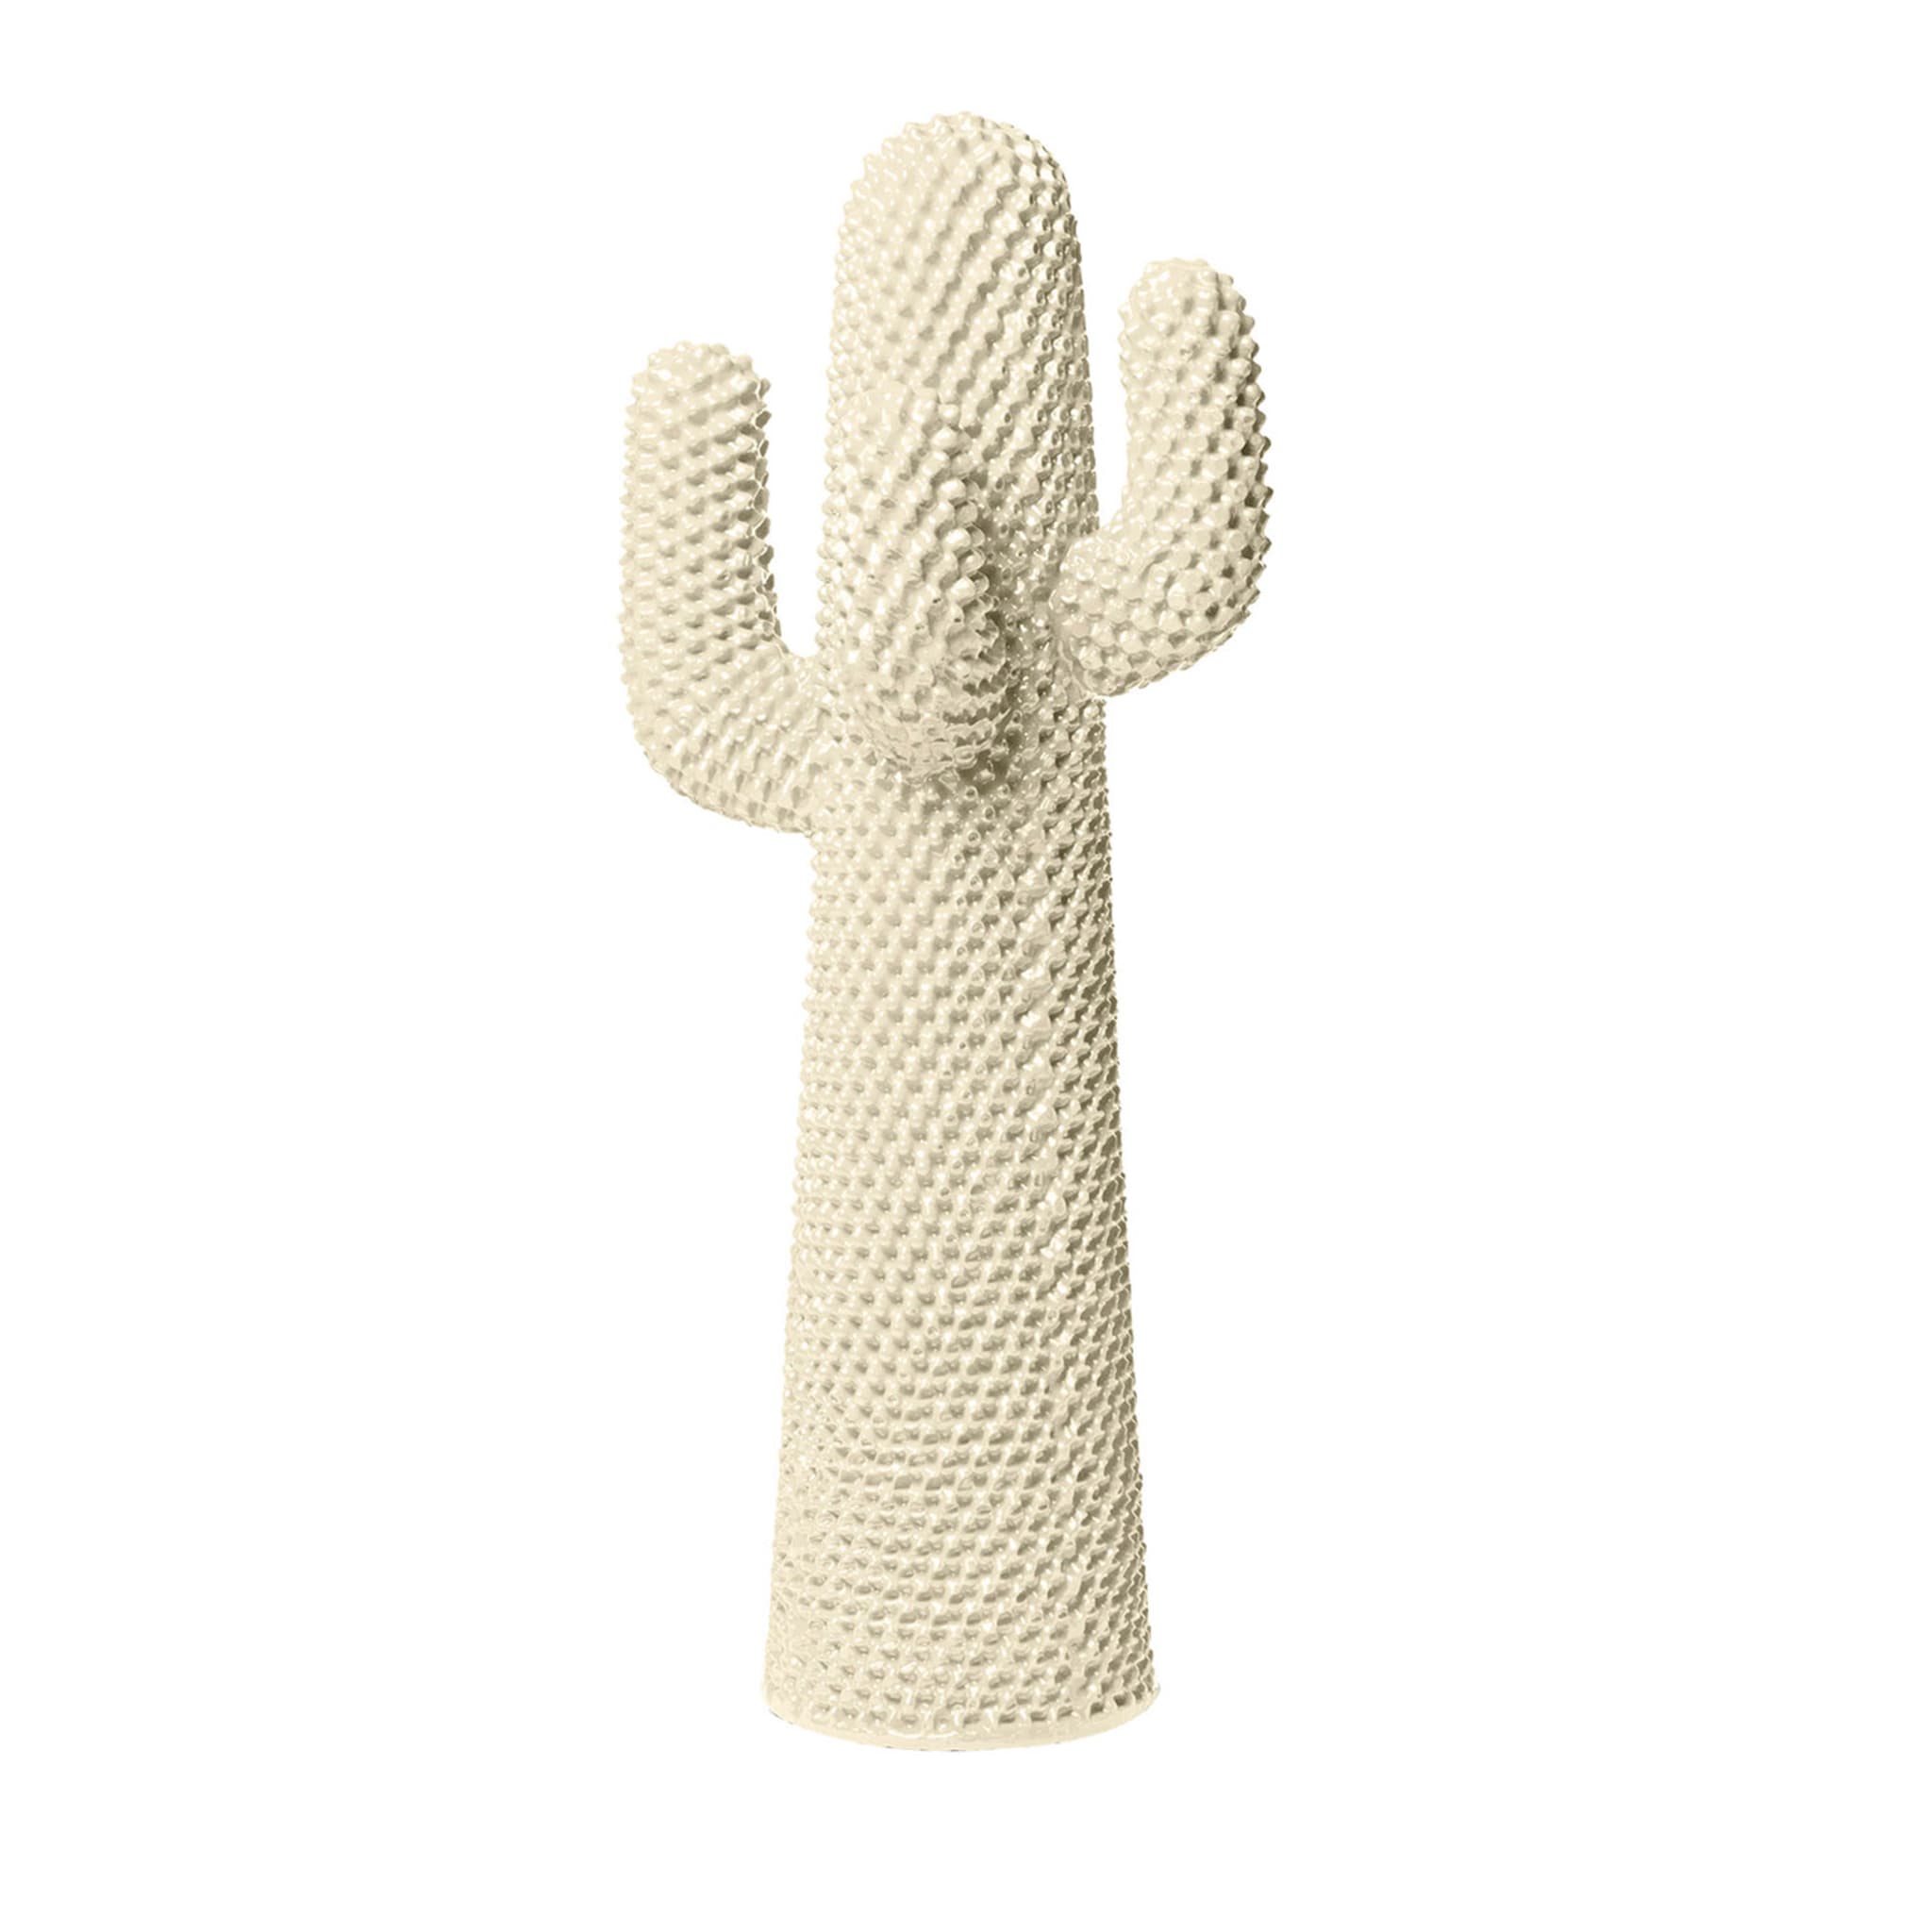 Another White Cactus Coat Stand by Drocco/Mello - Main view